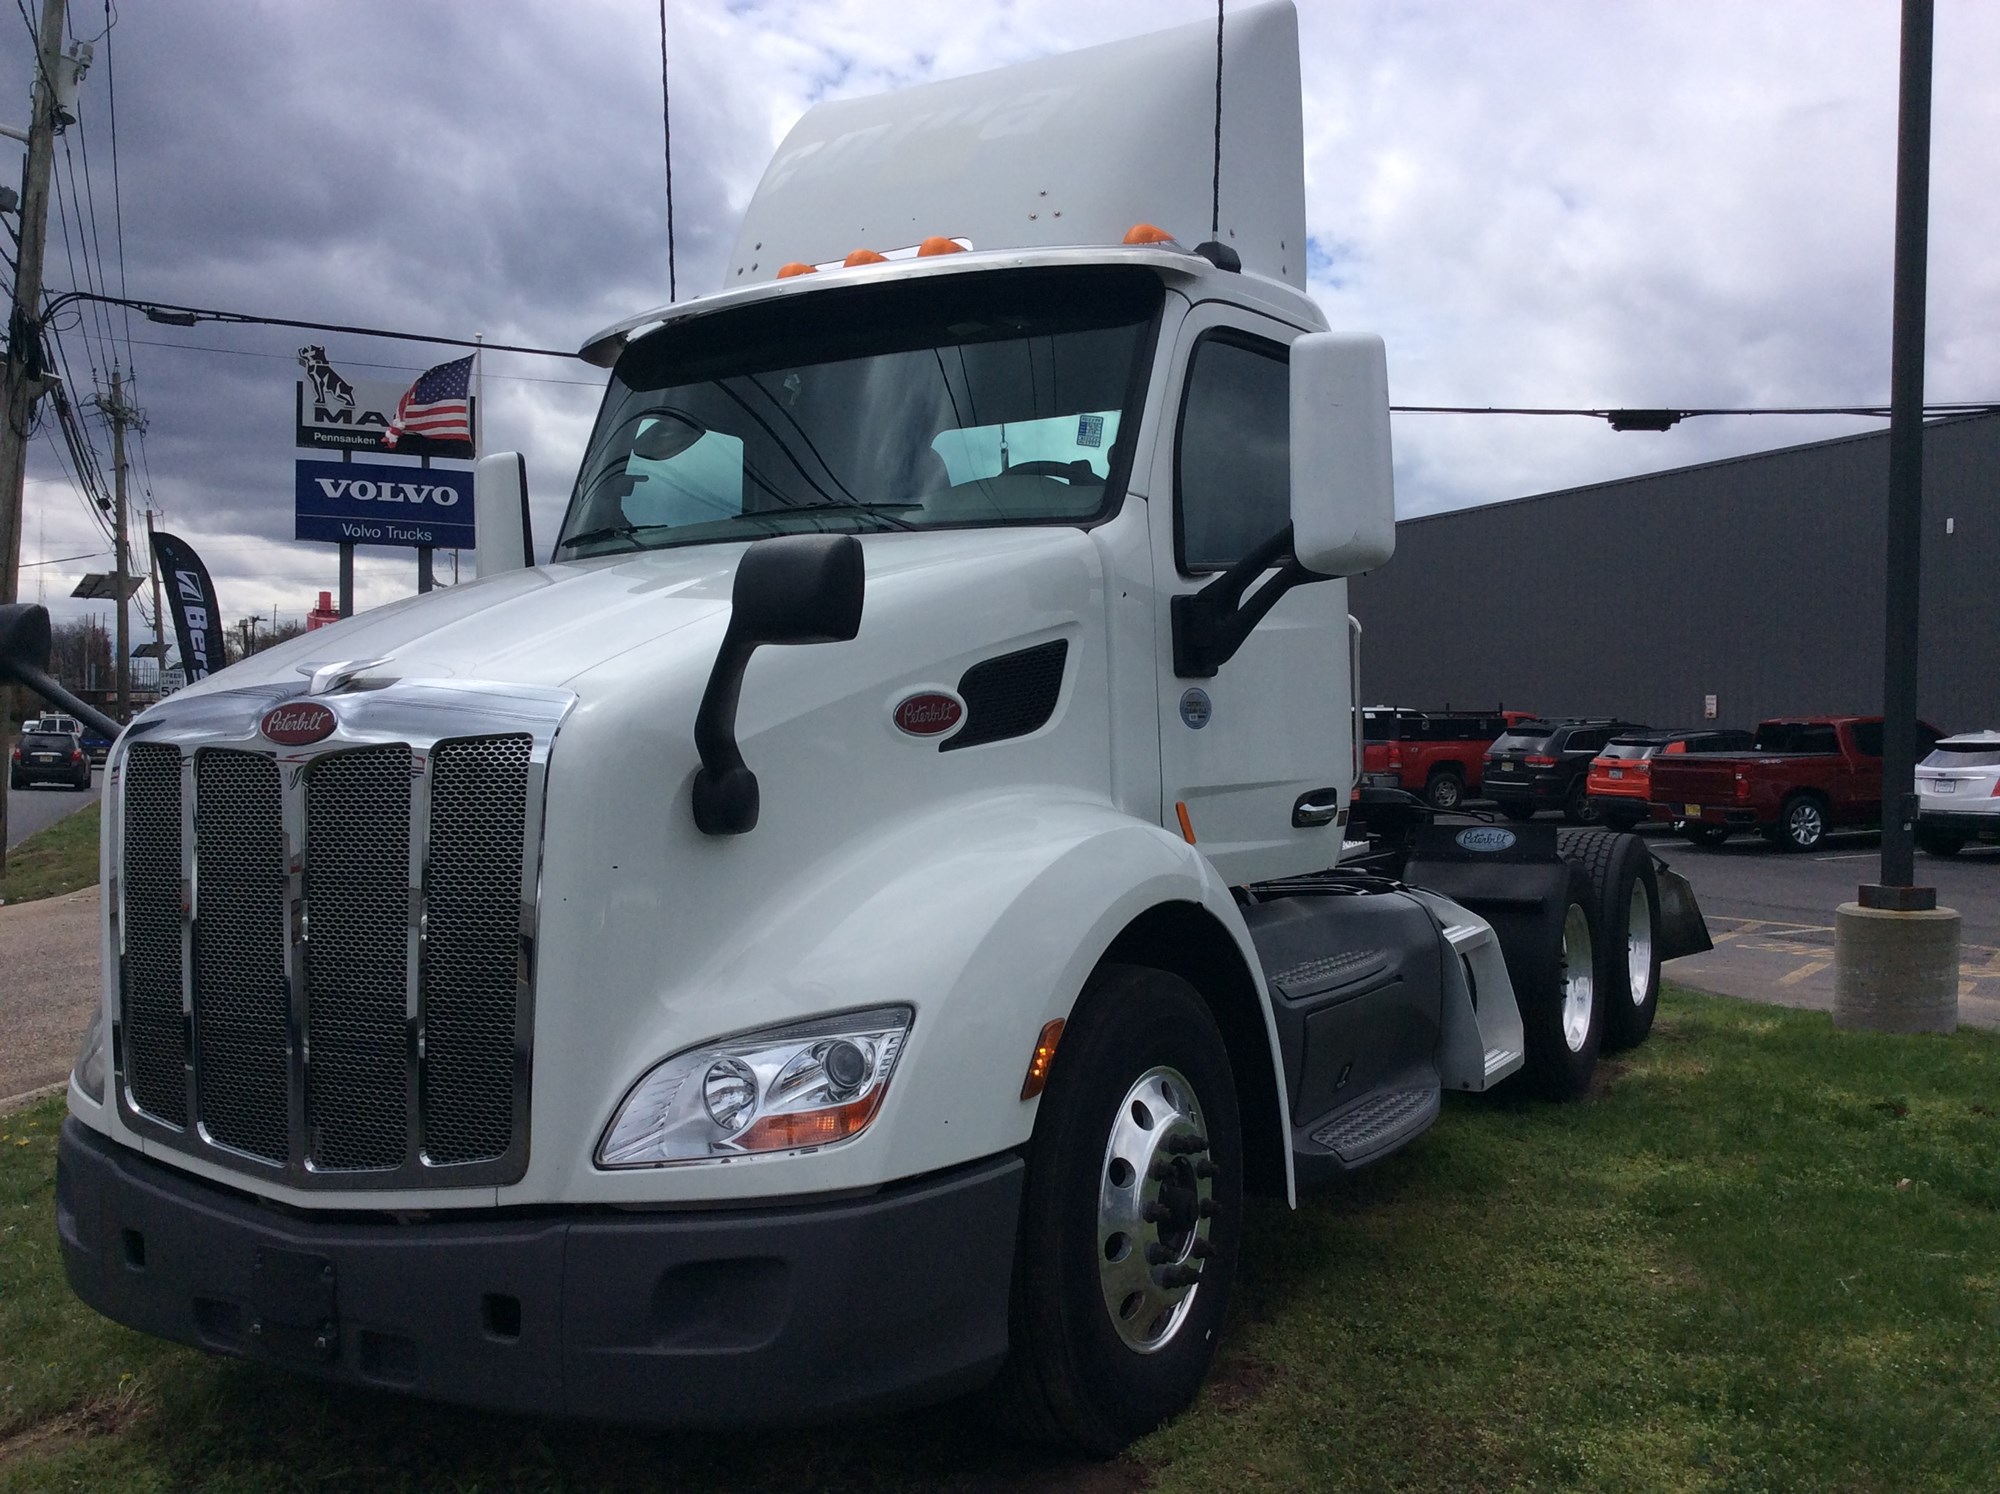 Used Truck Inventory - 1000878 01 - 82